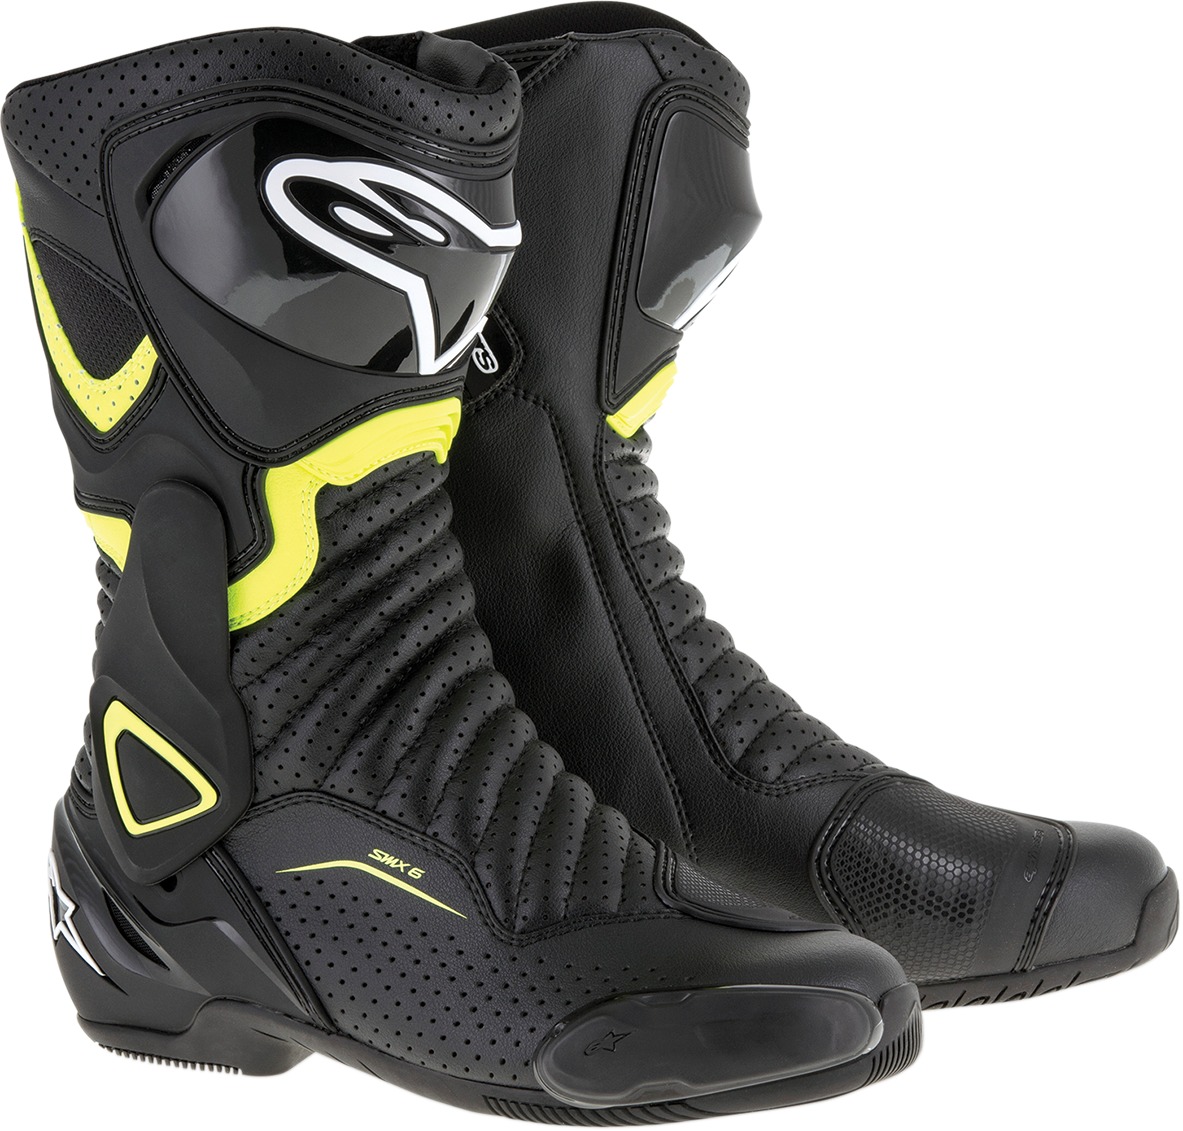 SMX-6v2 Vented Street Riding Boots Black/Yellow US 12 - Click Image to Close